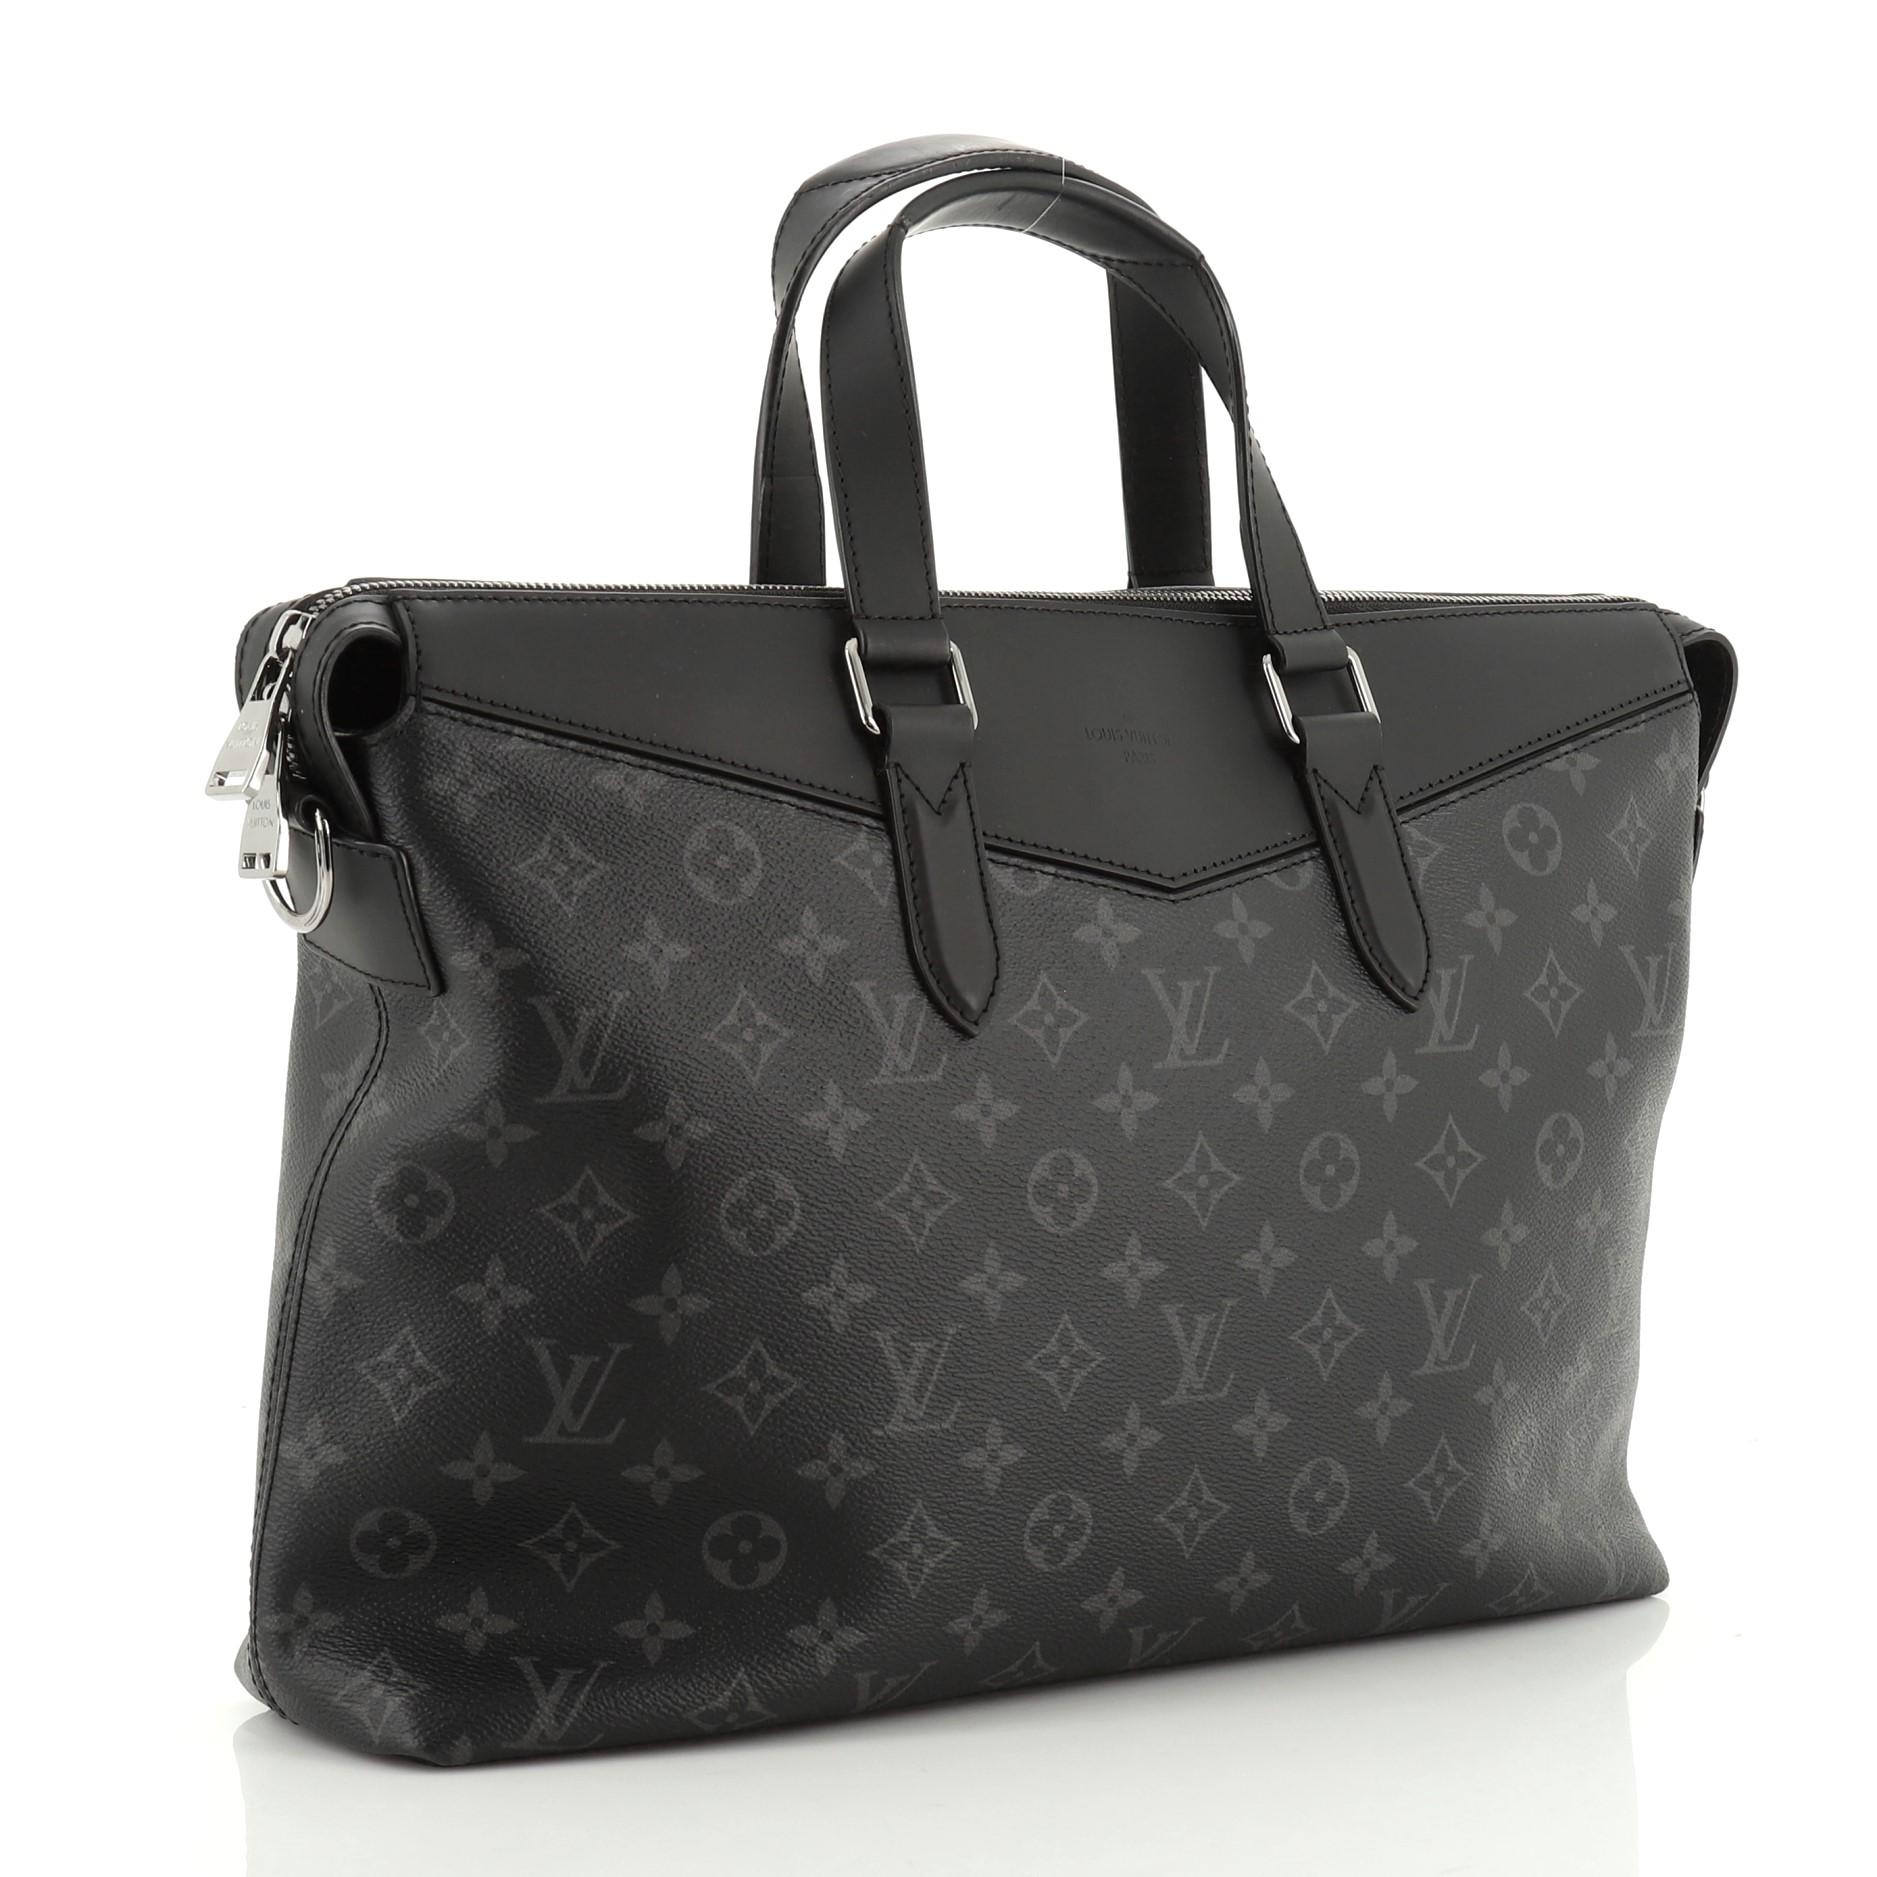 This Louis Vuitton Explorer Briefcase Monogram Eclipse Canvas, crafted in black eclipse monogram coated canvas, features dual-flat leather handles, adjustable shoulder strap, black leather trims, and gunmetal-tone hardware. Its zip closure opens to